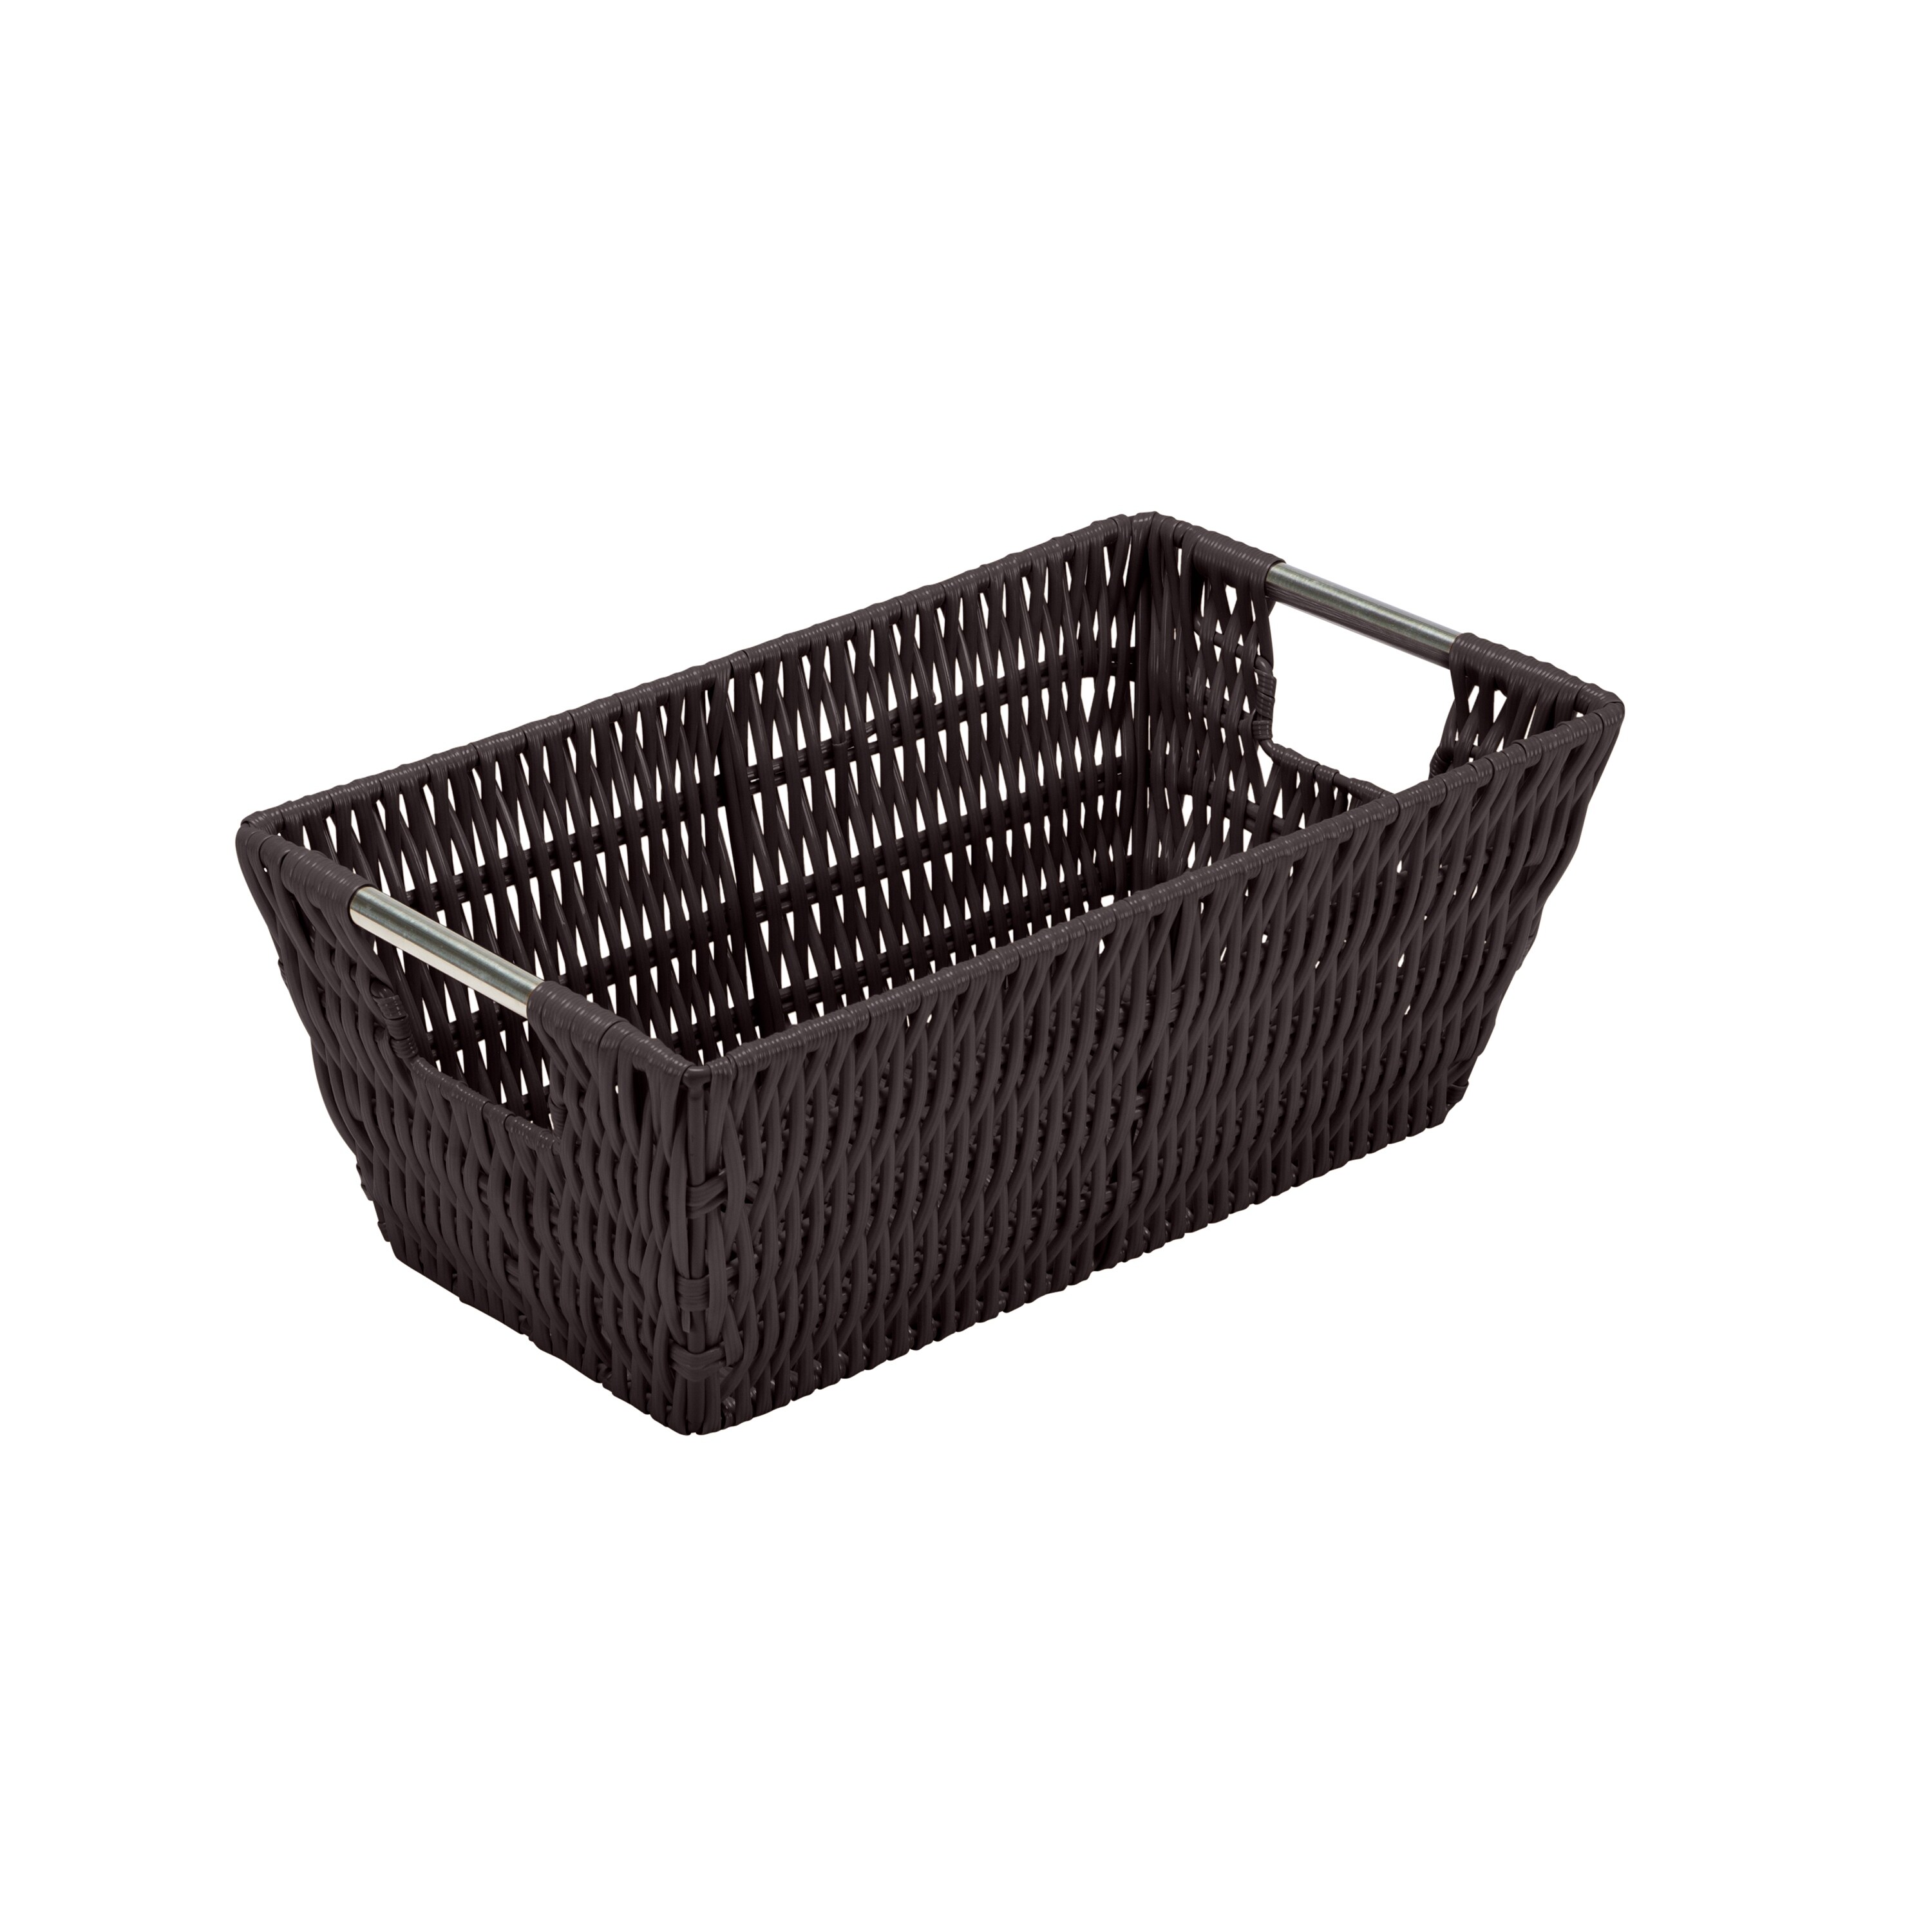 https://ak1.ostkcdn.com/images/products/is/images/direct/c899f77d6ad0dac04012593c32c9719becf40ca5/Simplify-Small-Shelf-Storage-Rattan-Tote-Basket-in-Charcoal.jpg